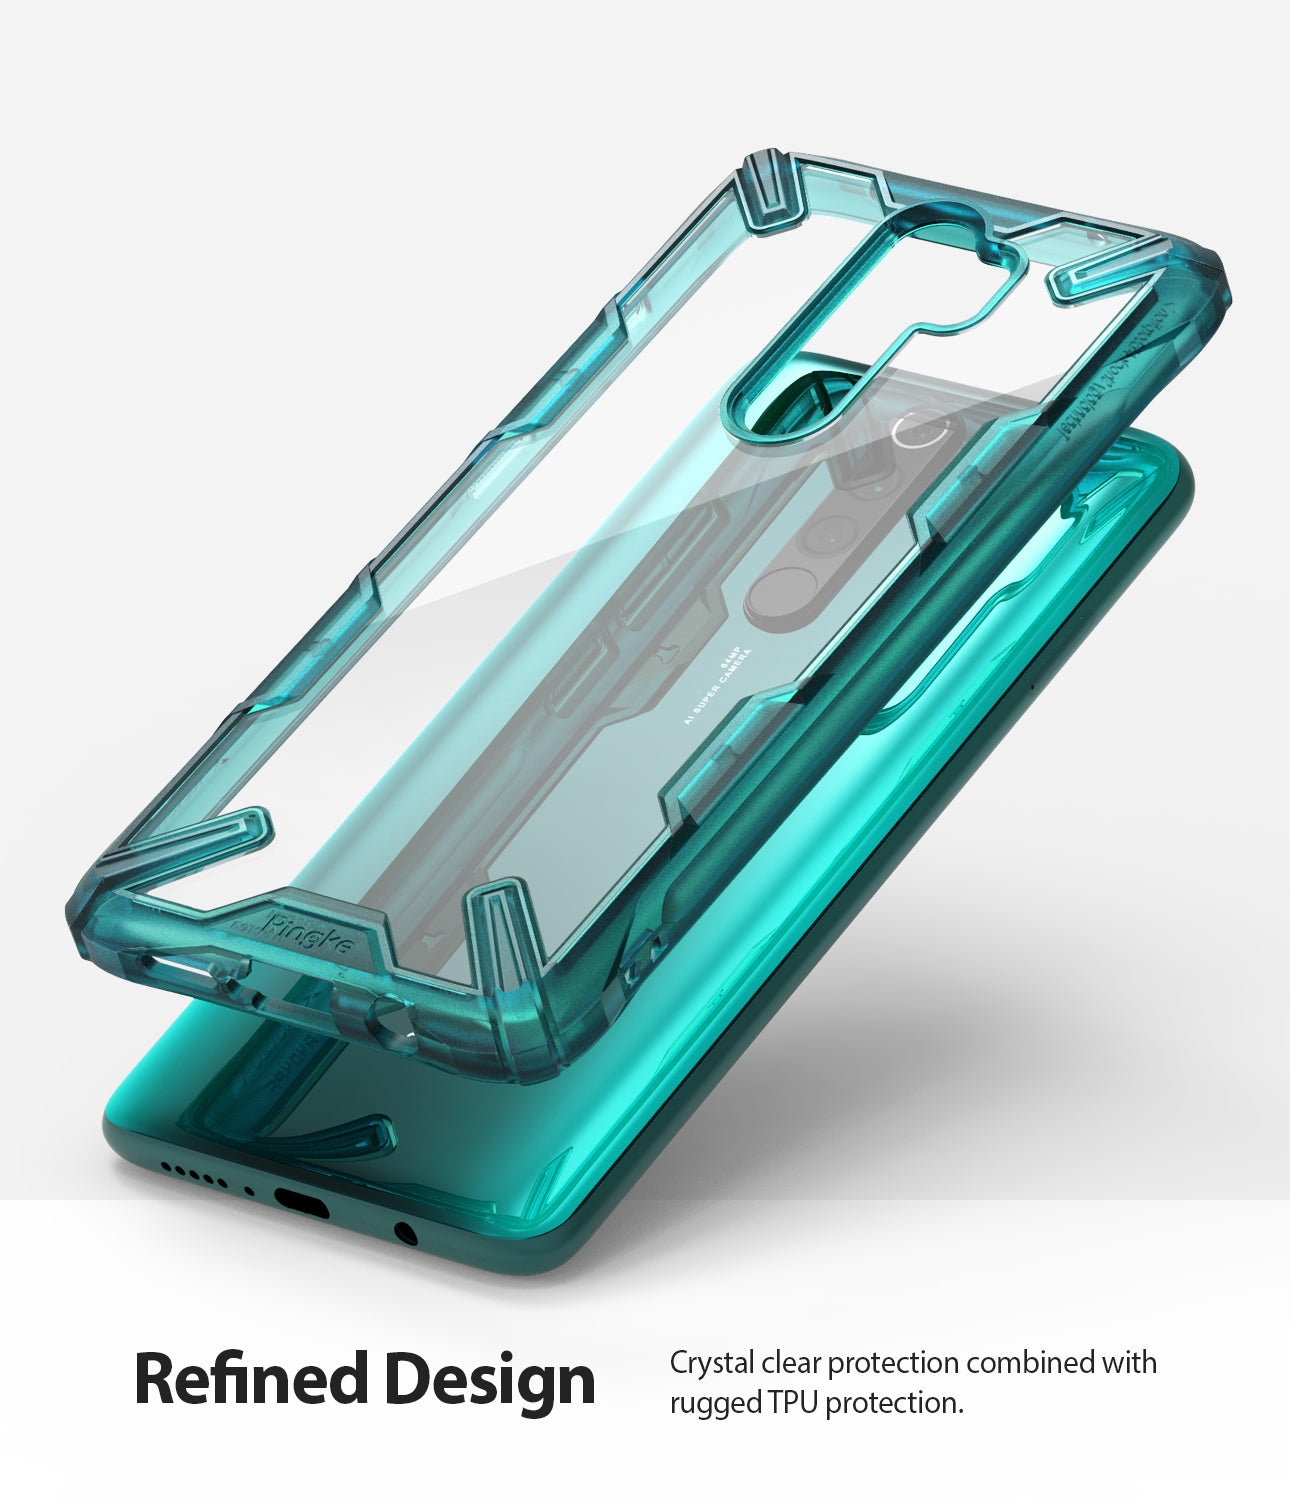 refined design - crystal clear protection combined with rugged TPU protection